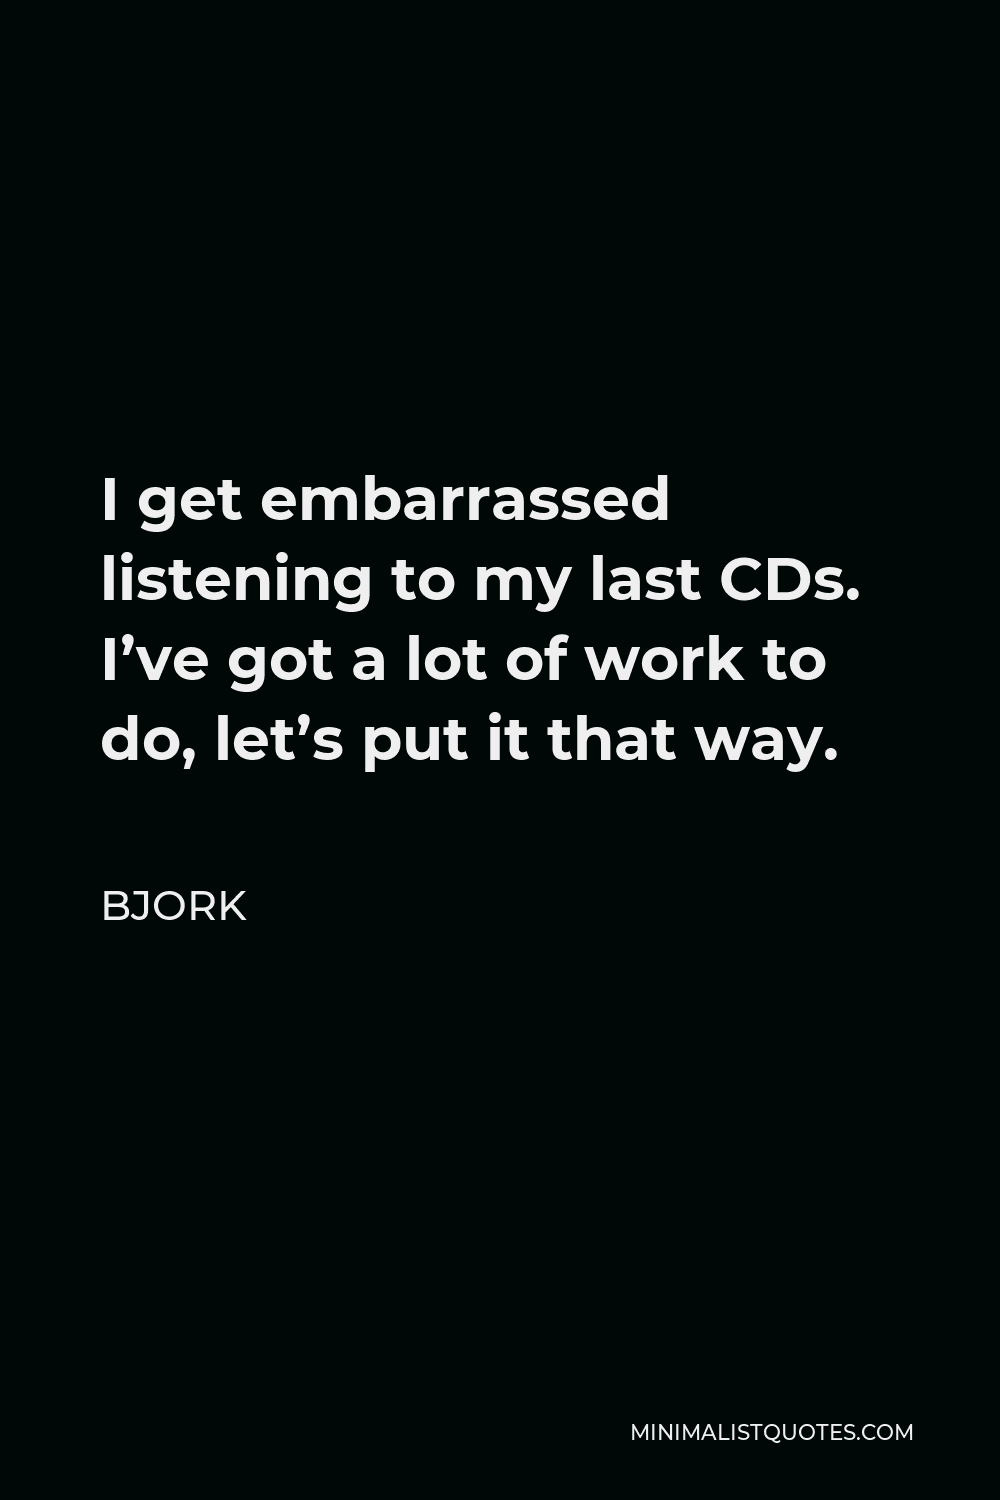 Bjork Quote - I get embarrassed listening to my last CDs. I’ve got a lot of work to do, let’s put it that way.